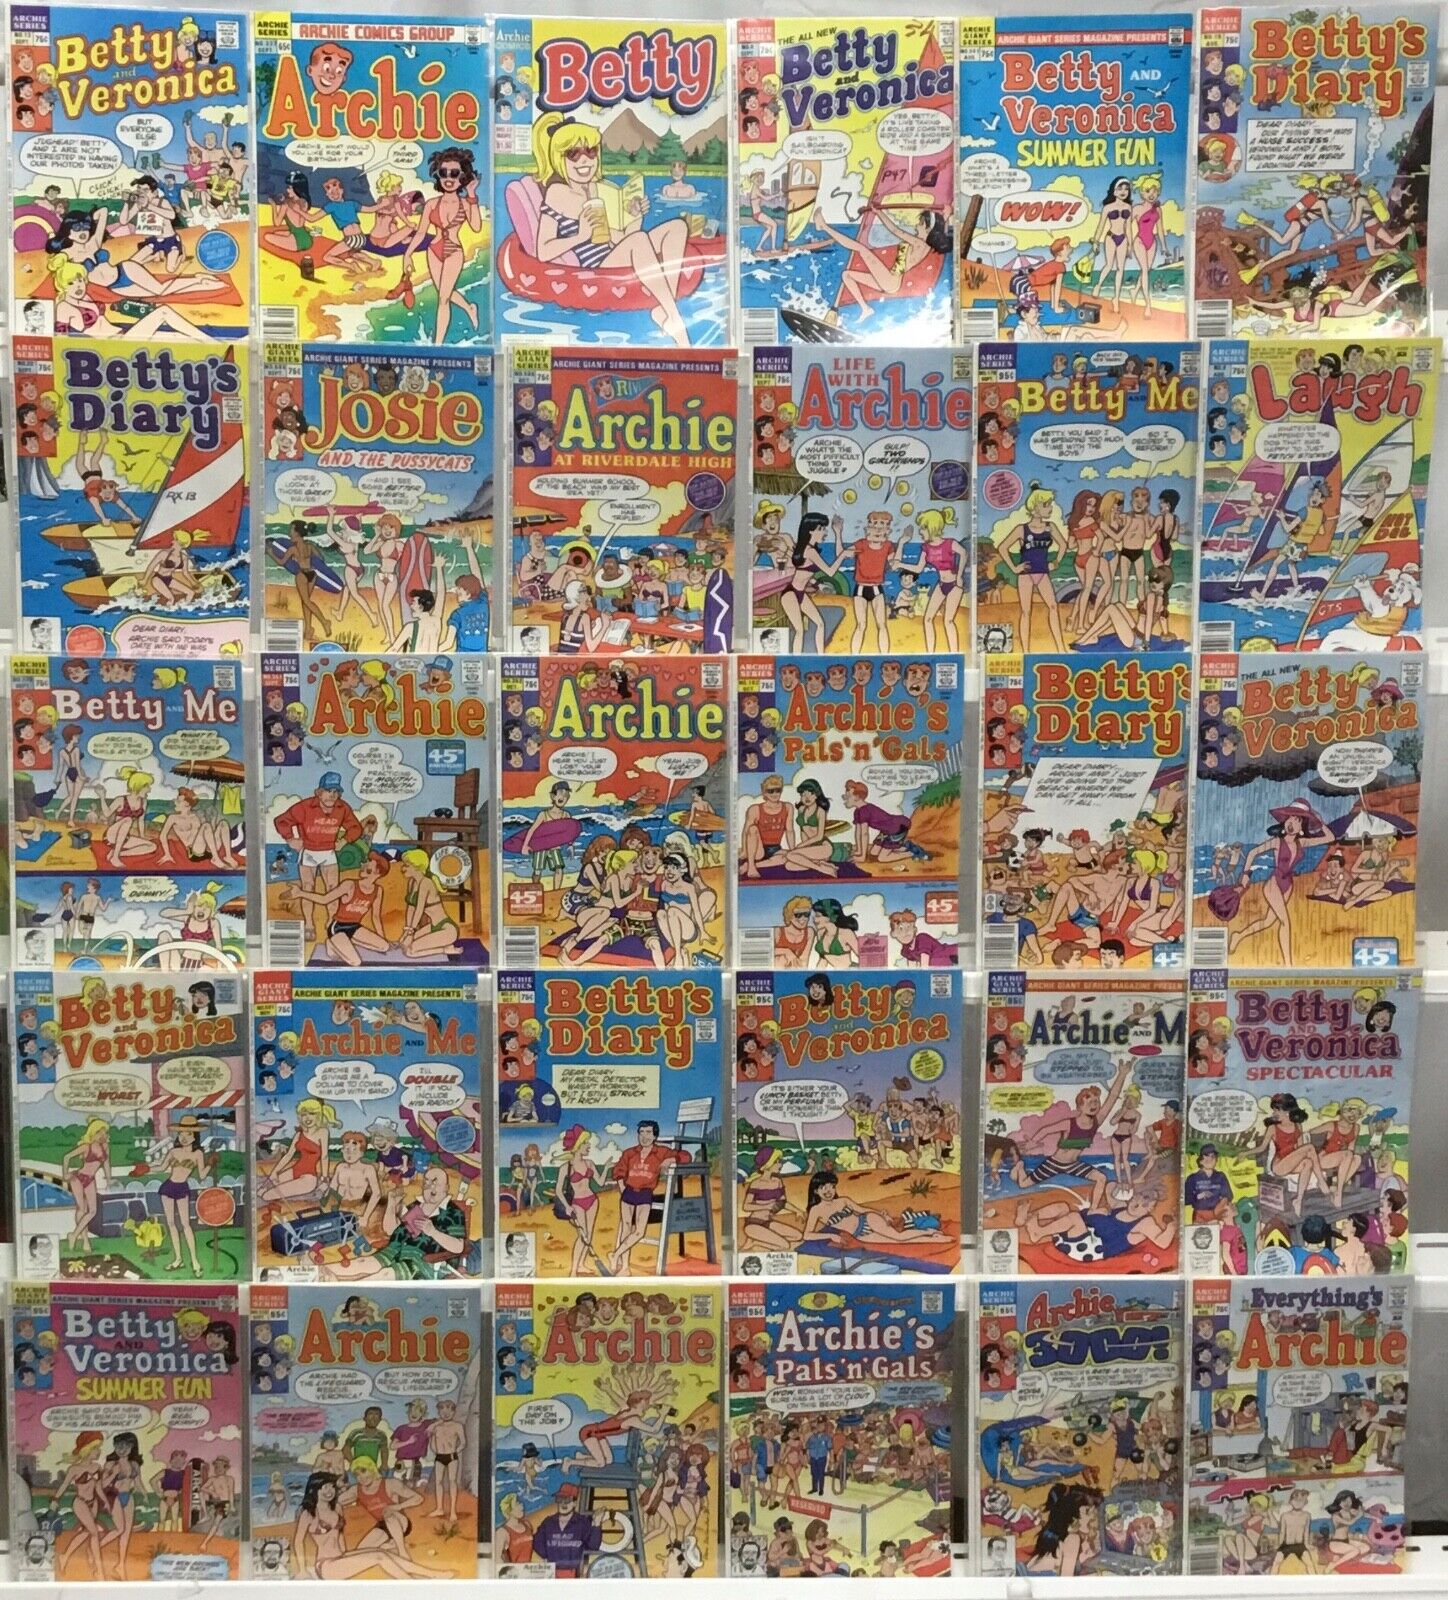 Archie Comics - Archie Bathing Suit Covers - Comic Book Lot of 30 Issues